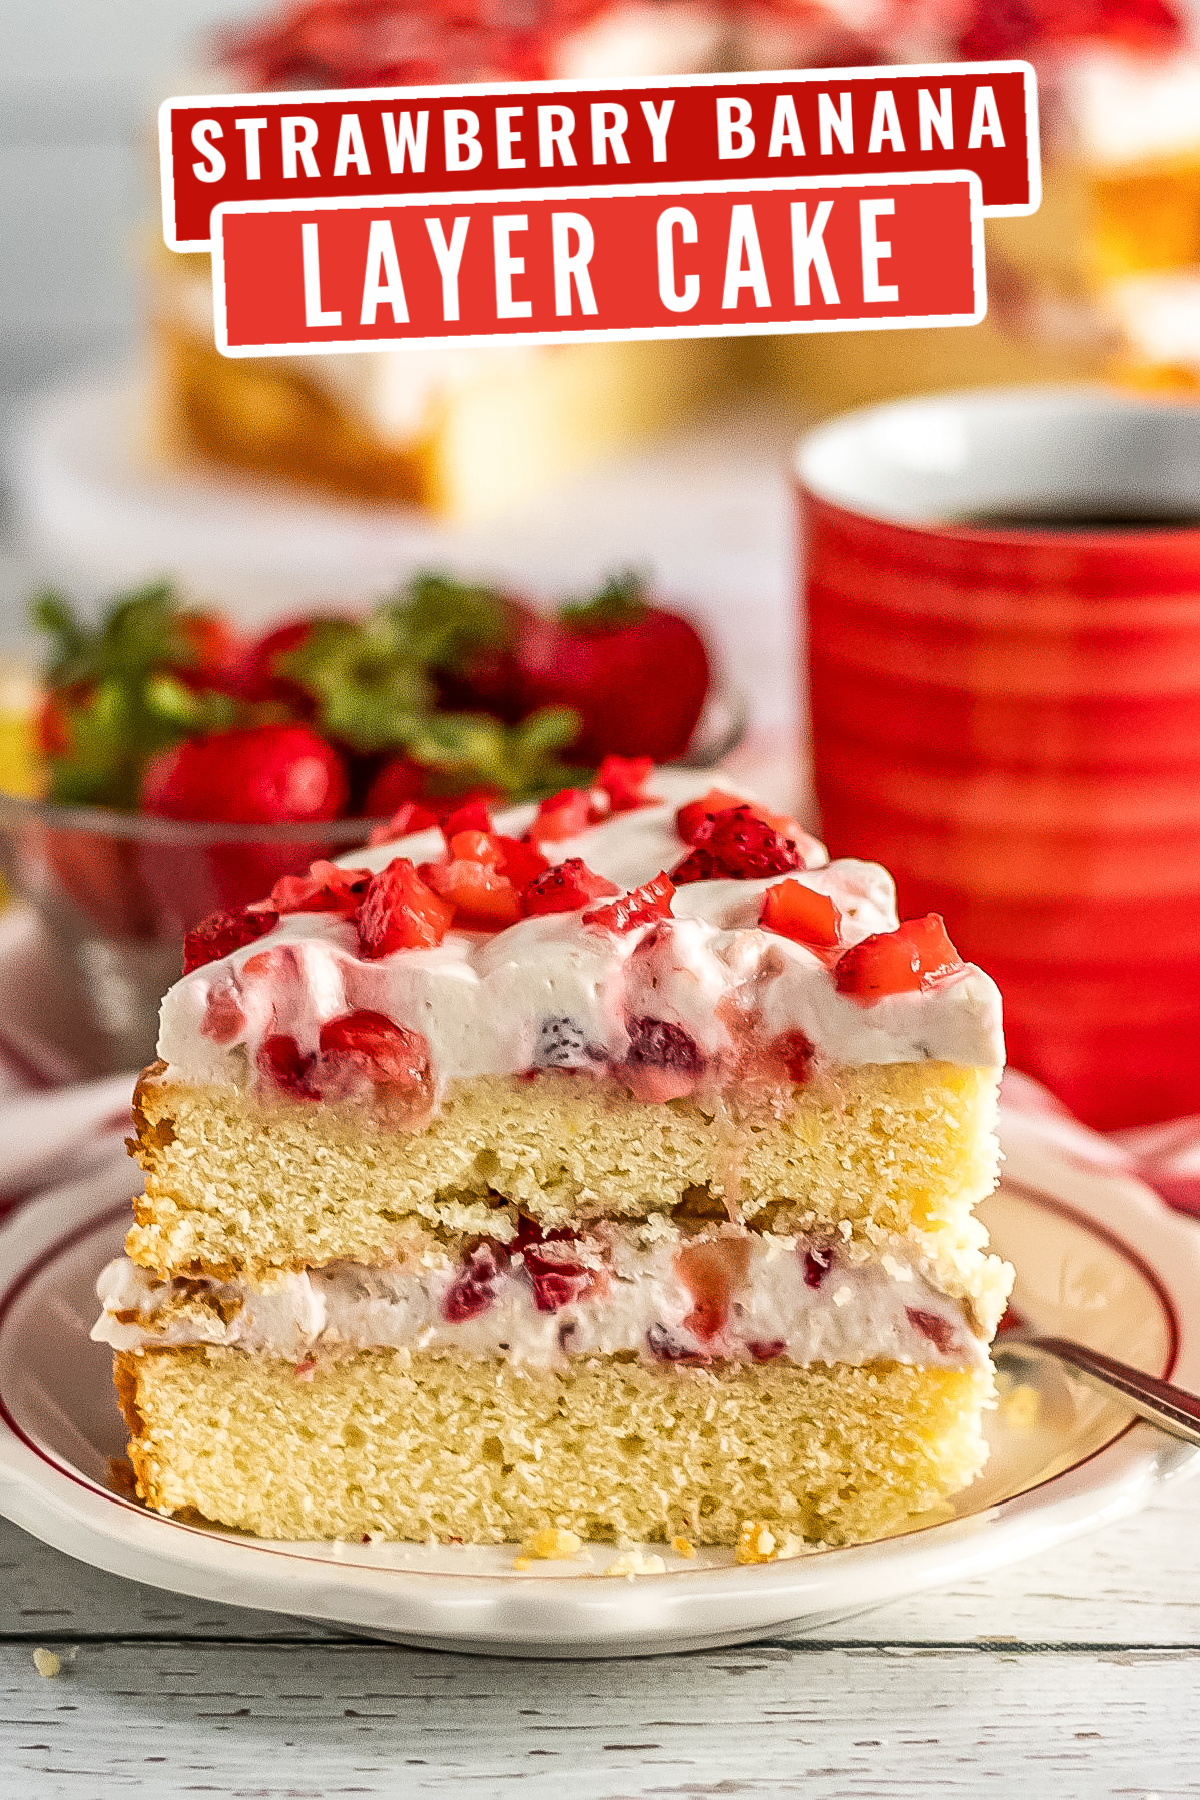 An, easy recipe for a strawberry banana layer cake with layers of creamy whipped cream frosting made with fresh bananas and strawberries.